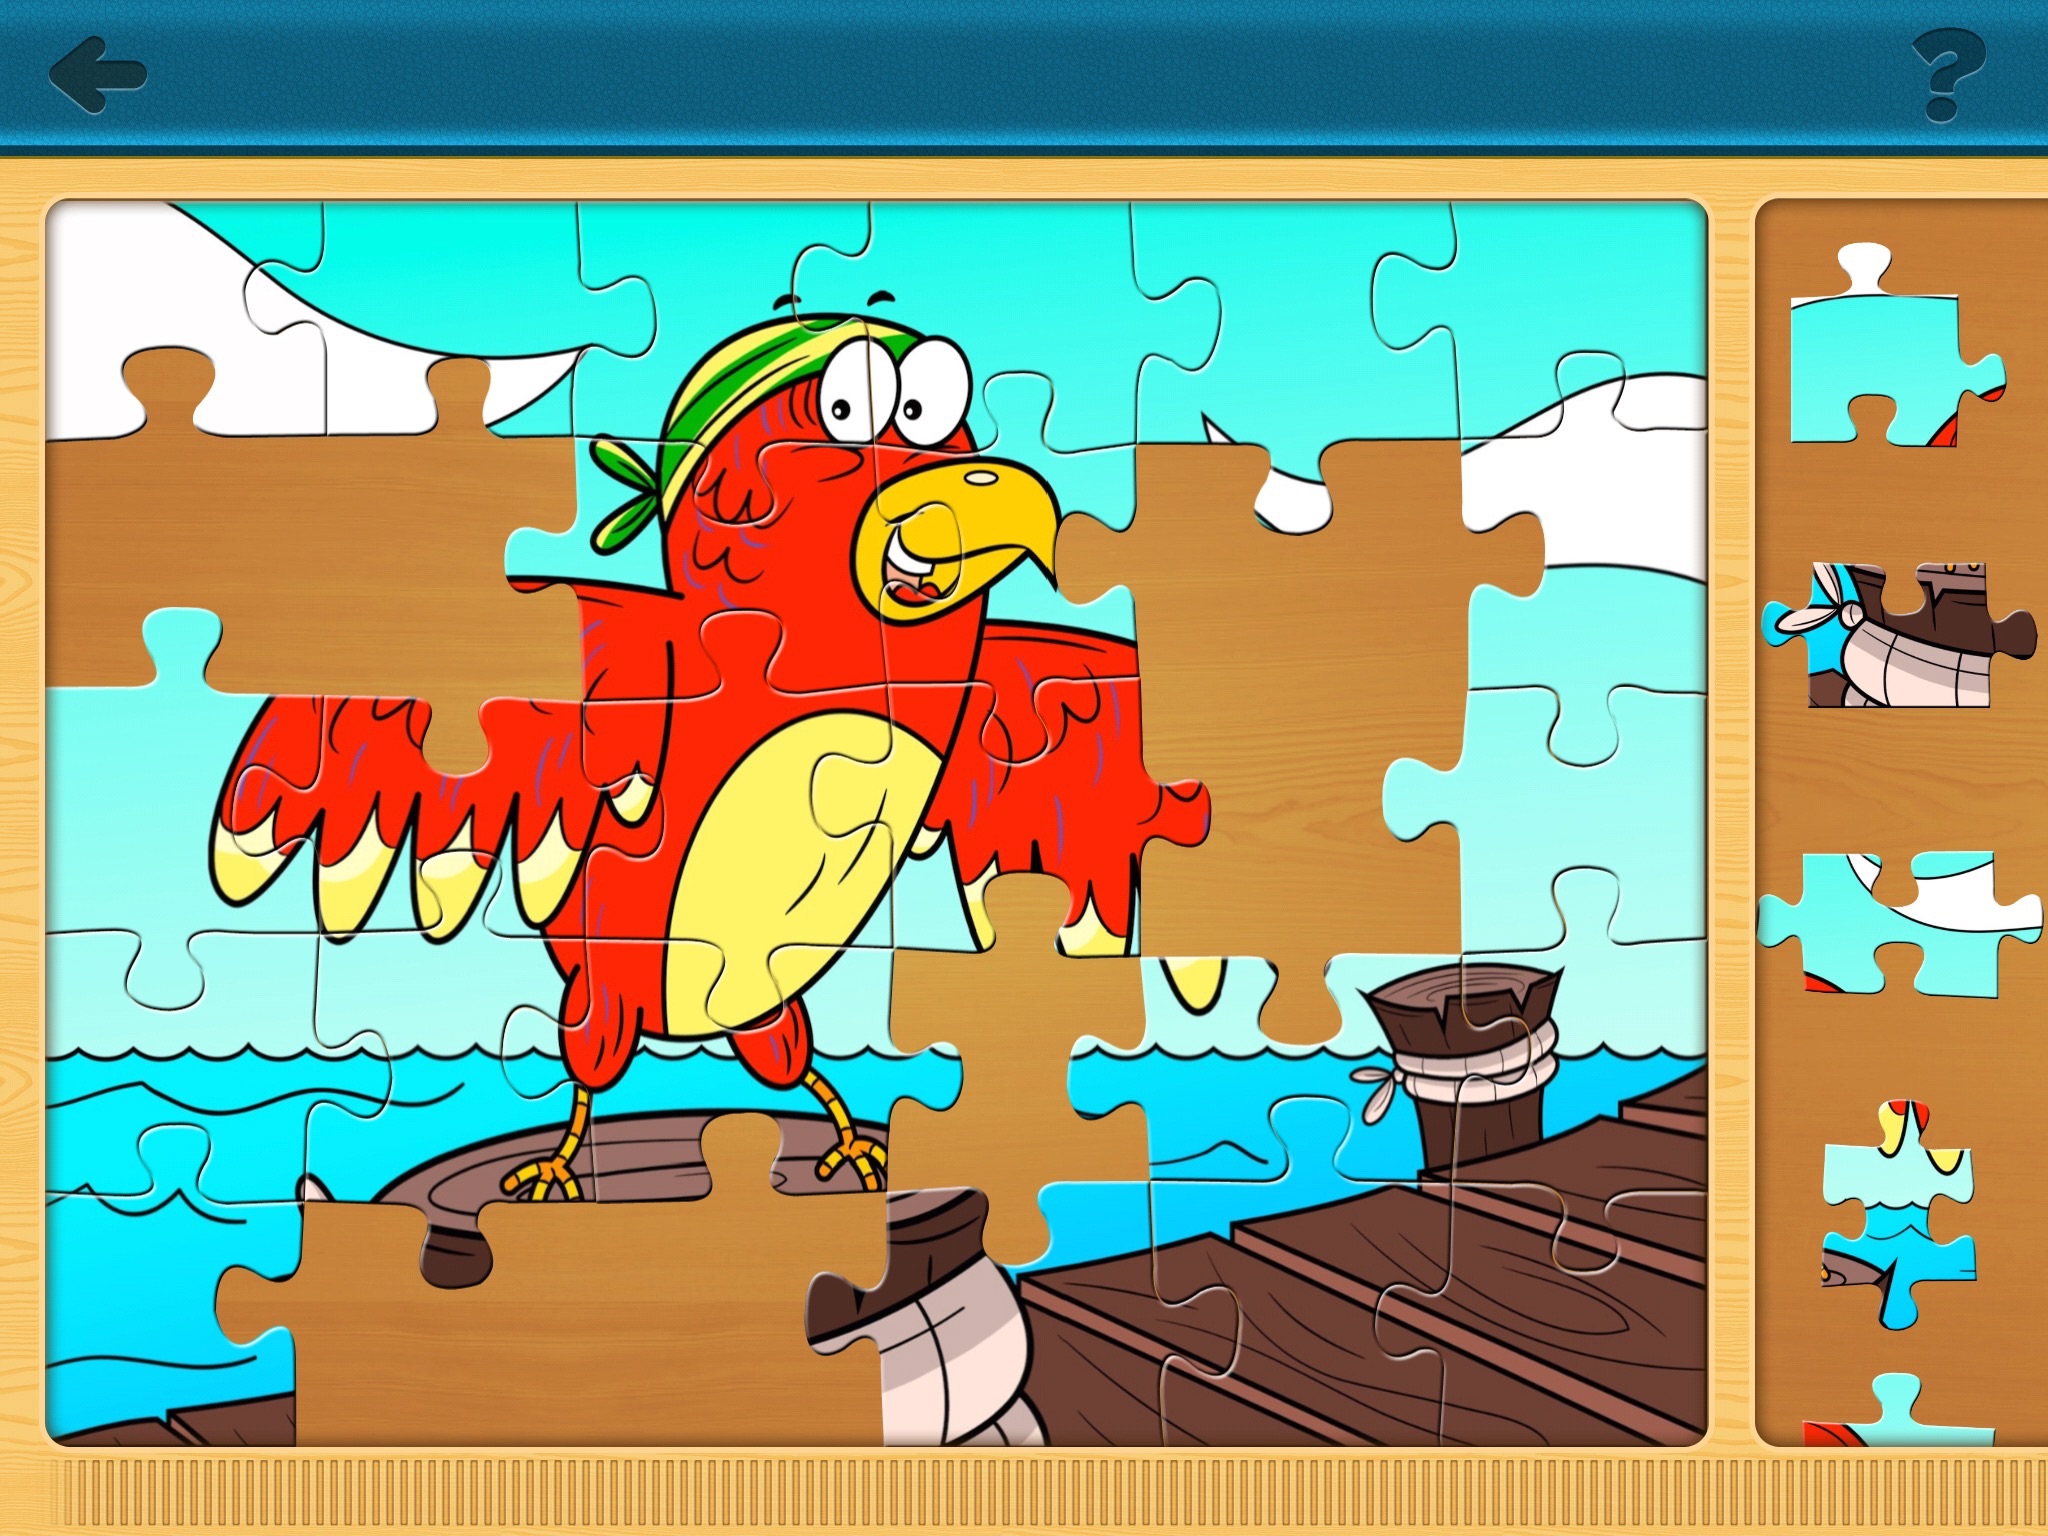 Jigsaw Puzzles (Pirates) FREE - Kids Puzzle Learning Games for Pirate Preschoolers screenshot 4